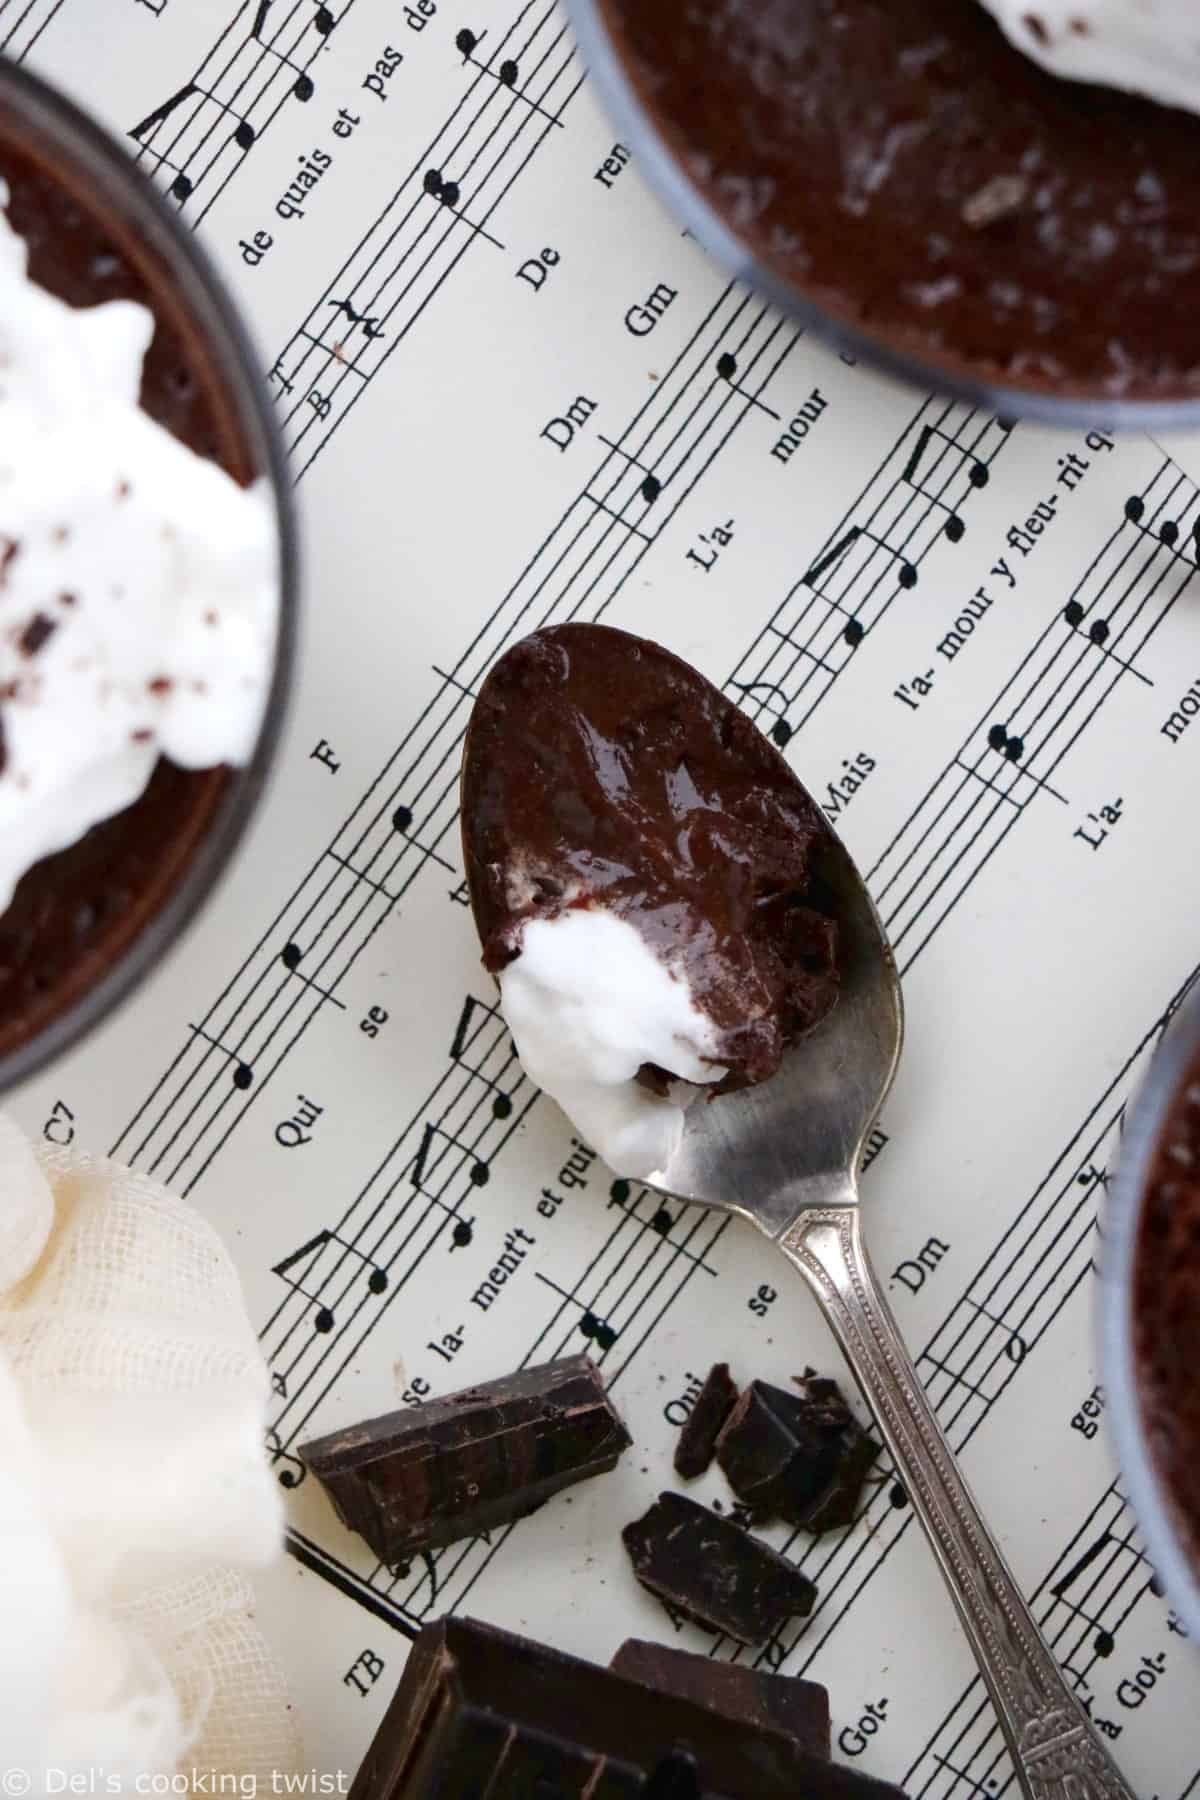 Chocolate pots de crème are rich and creamy French chocolate custards with intense chocolate flavors.